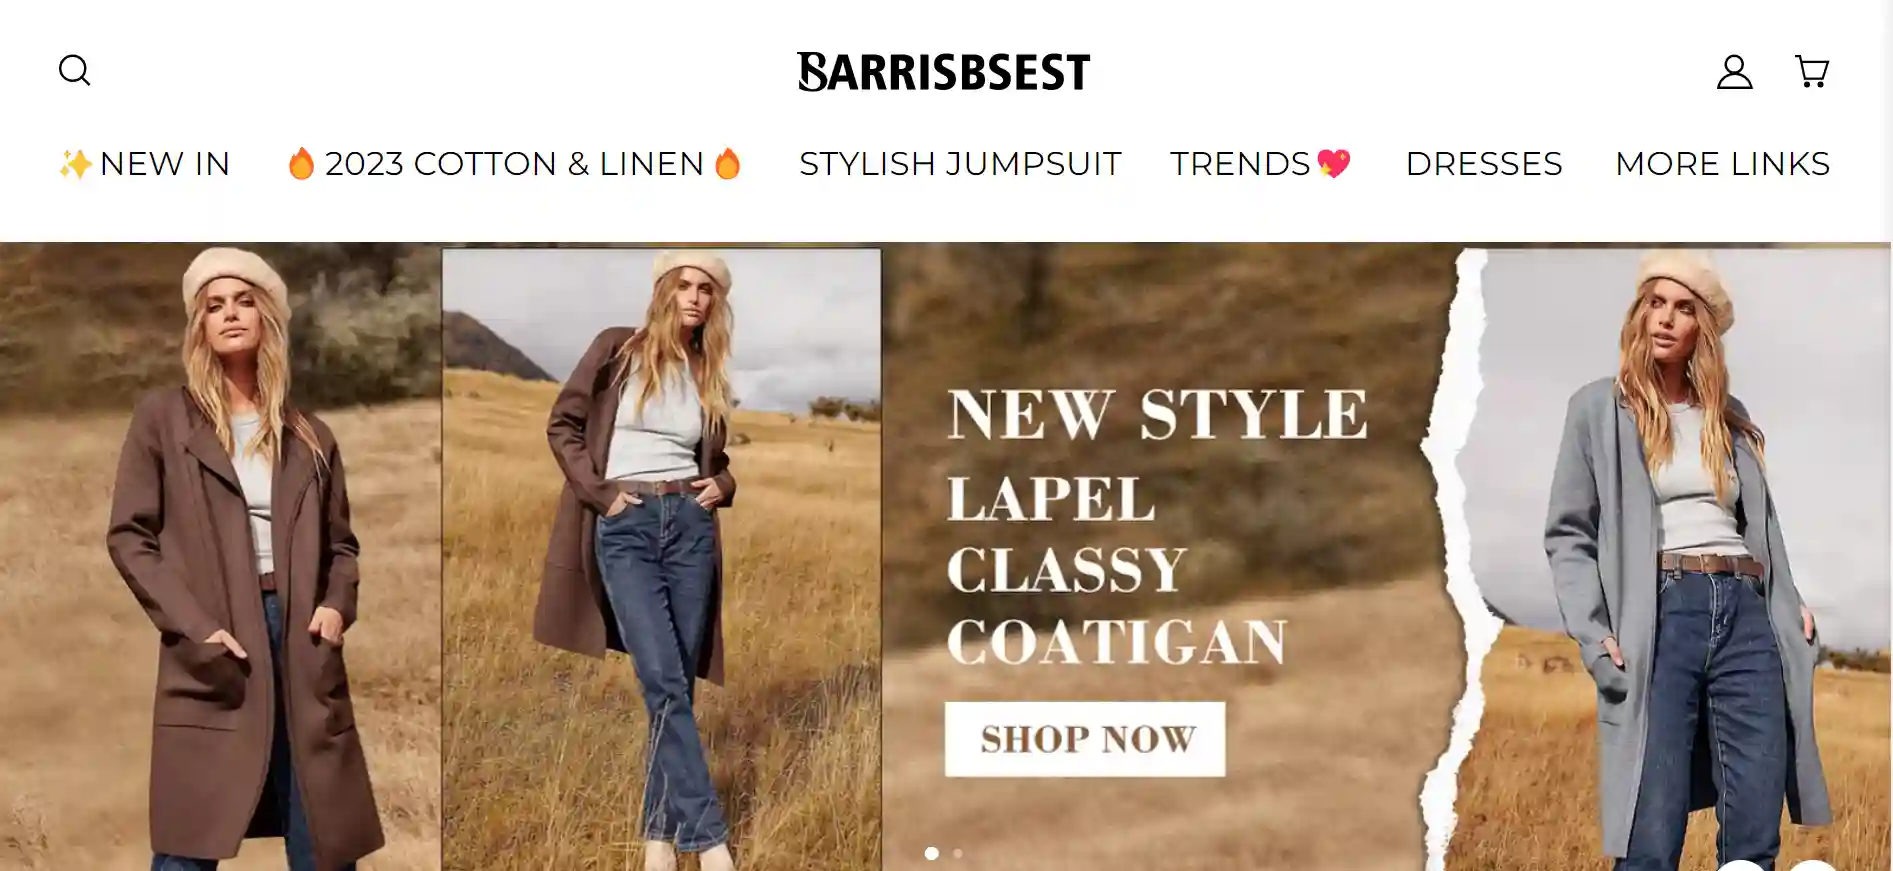 You are currently viewing Barrisbest Clothing Reviews: Worth Trying or Not?